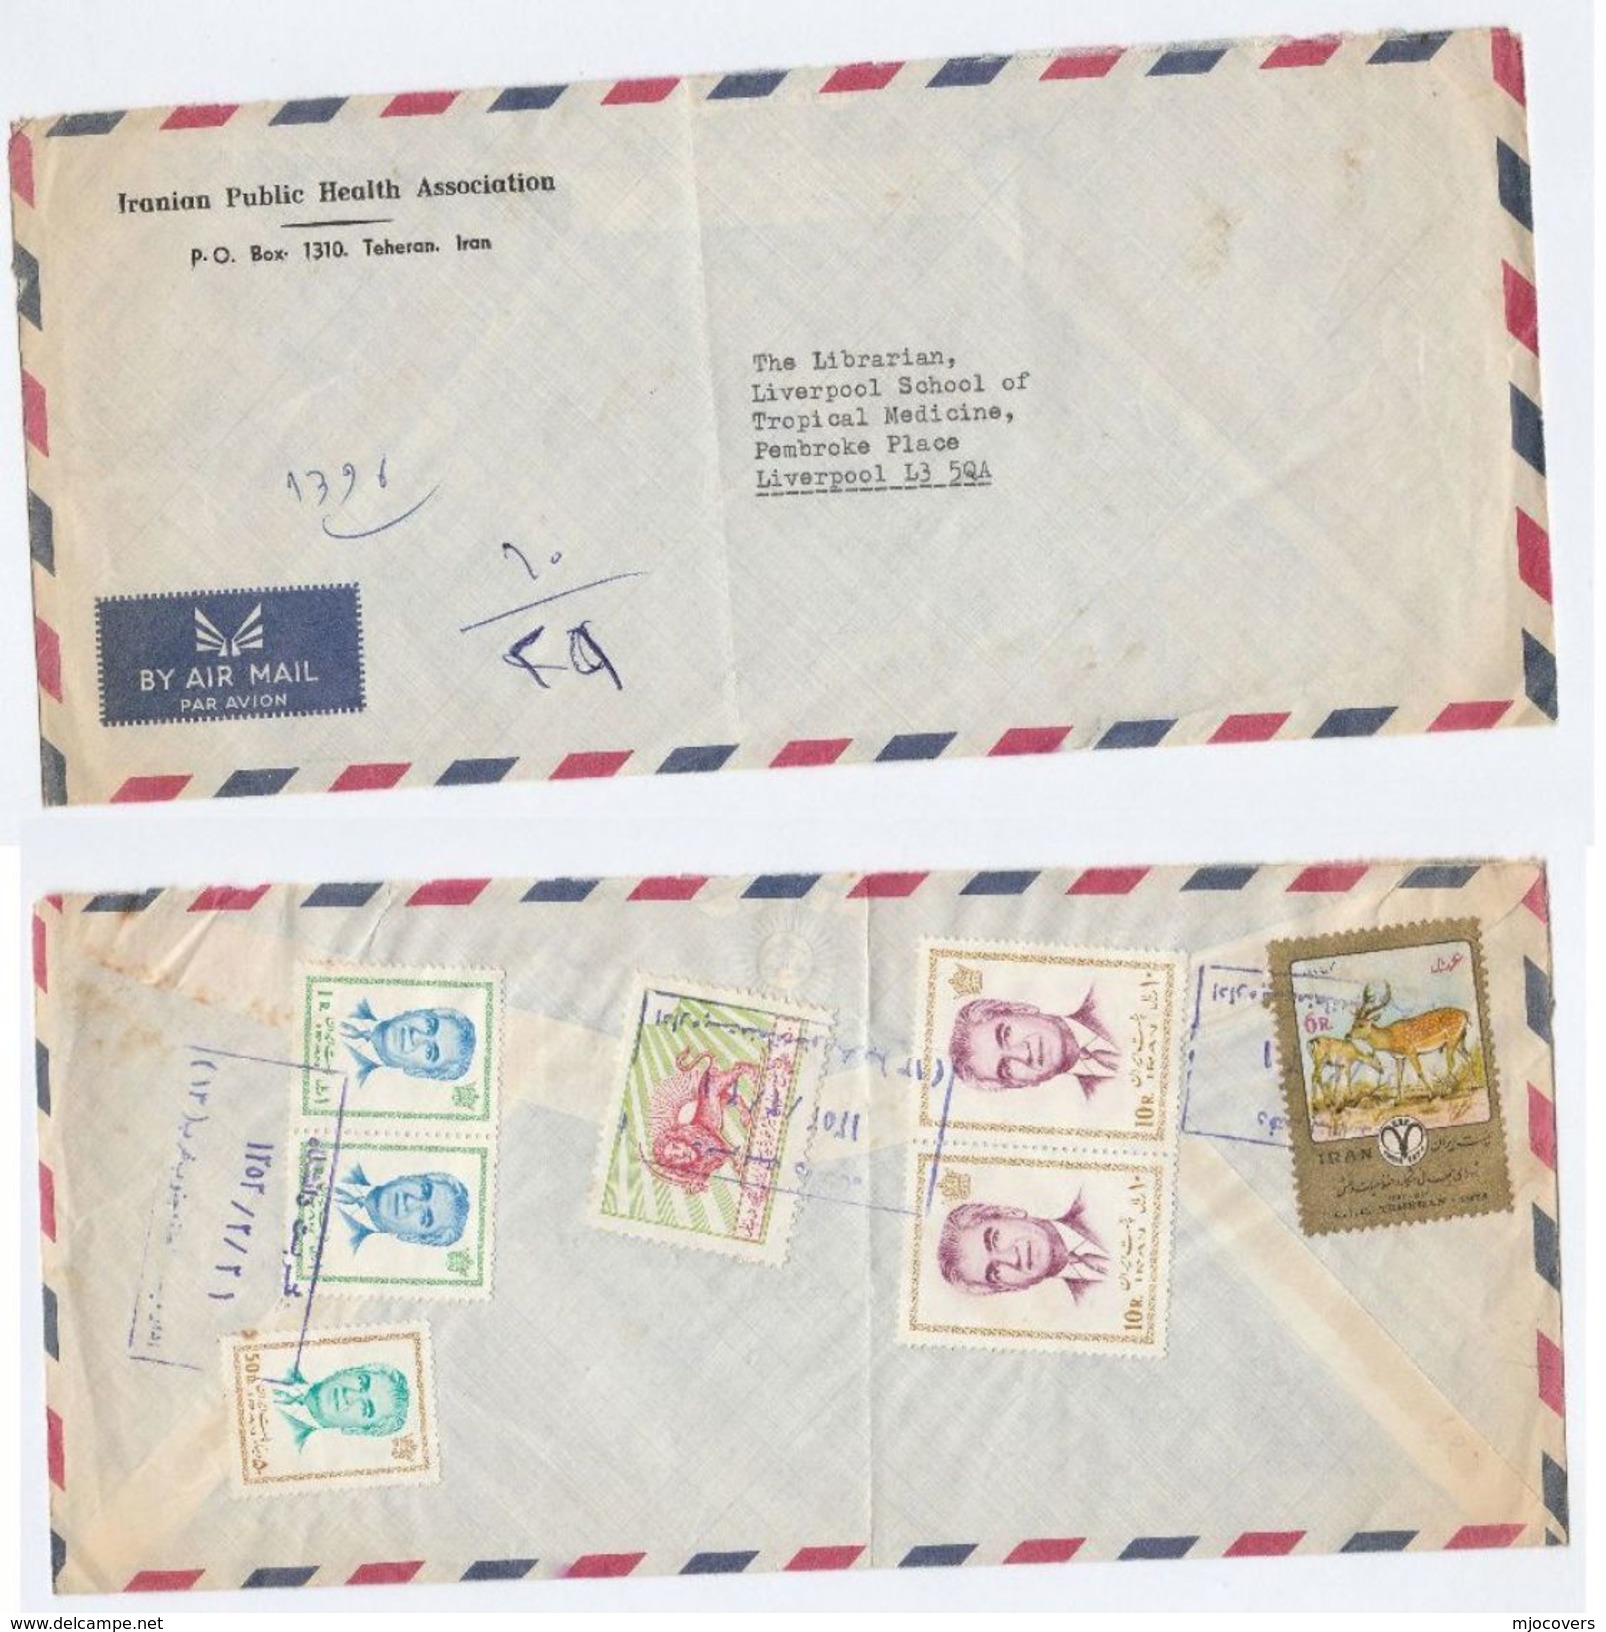 IRAN Public HEALTH AUTHORITY To Liverpool TROPICAL MEDICINE School Cover GB Stamps - Disease